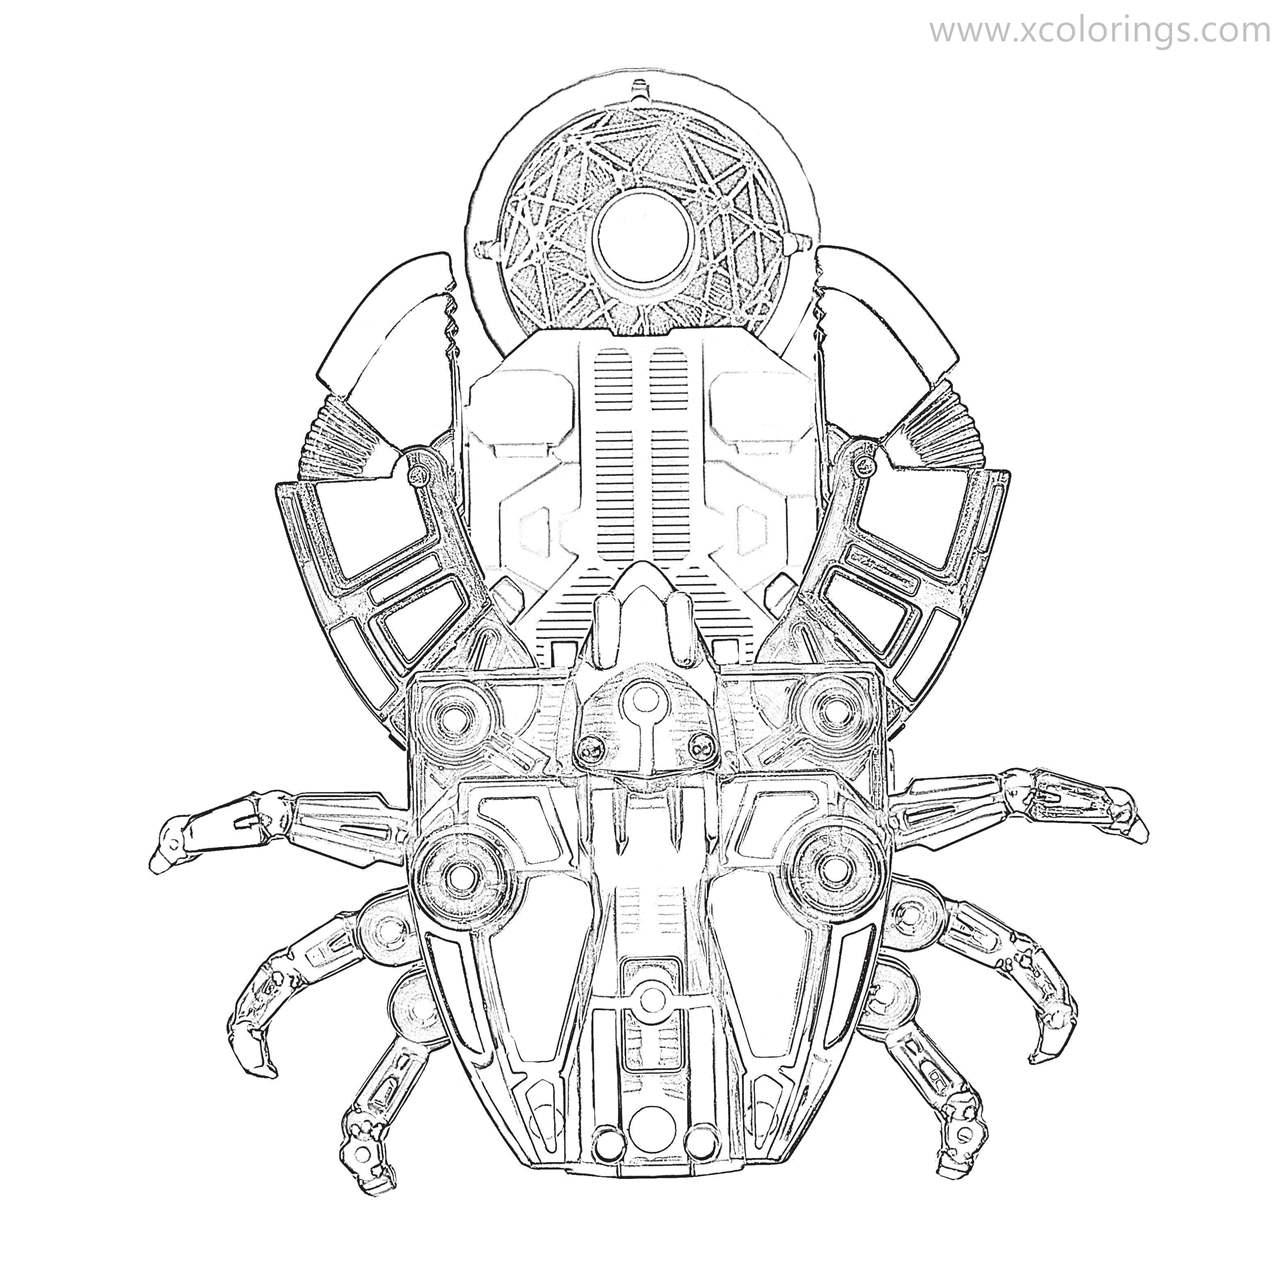 Free Screechers Wild Coloring Pages Shellheim Crab Machine printable